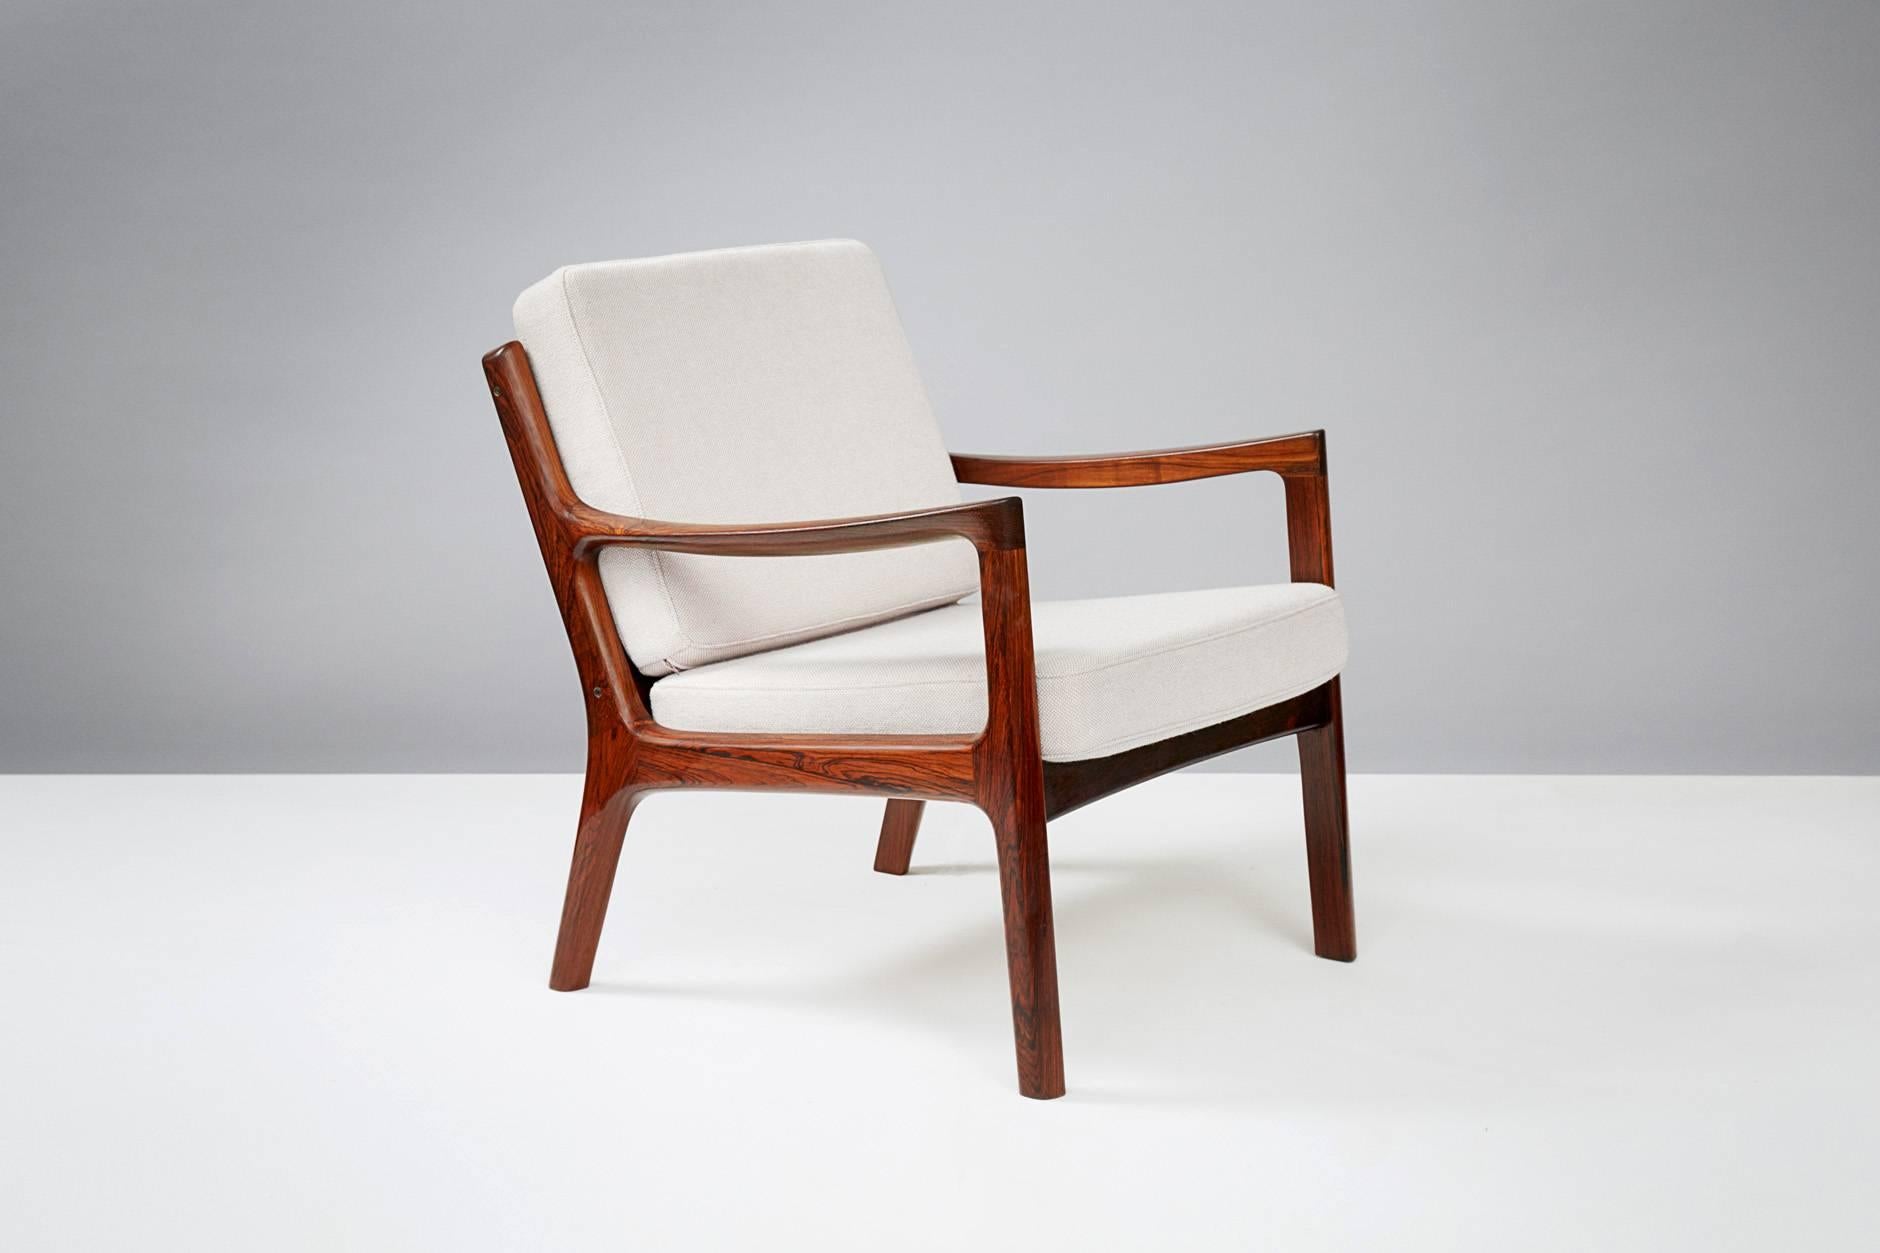 Ole Wanscher

Senator lounge chair, circa 1960

Limited edition version produced by France & Son, Denmark in Brazilian rosewood. Includes maker's badge. New cushions covered in Kvadrat Hallingdal #103 wool fabric.